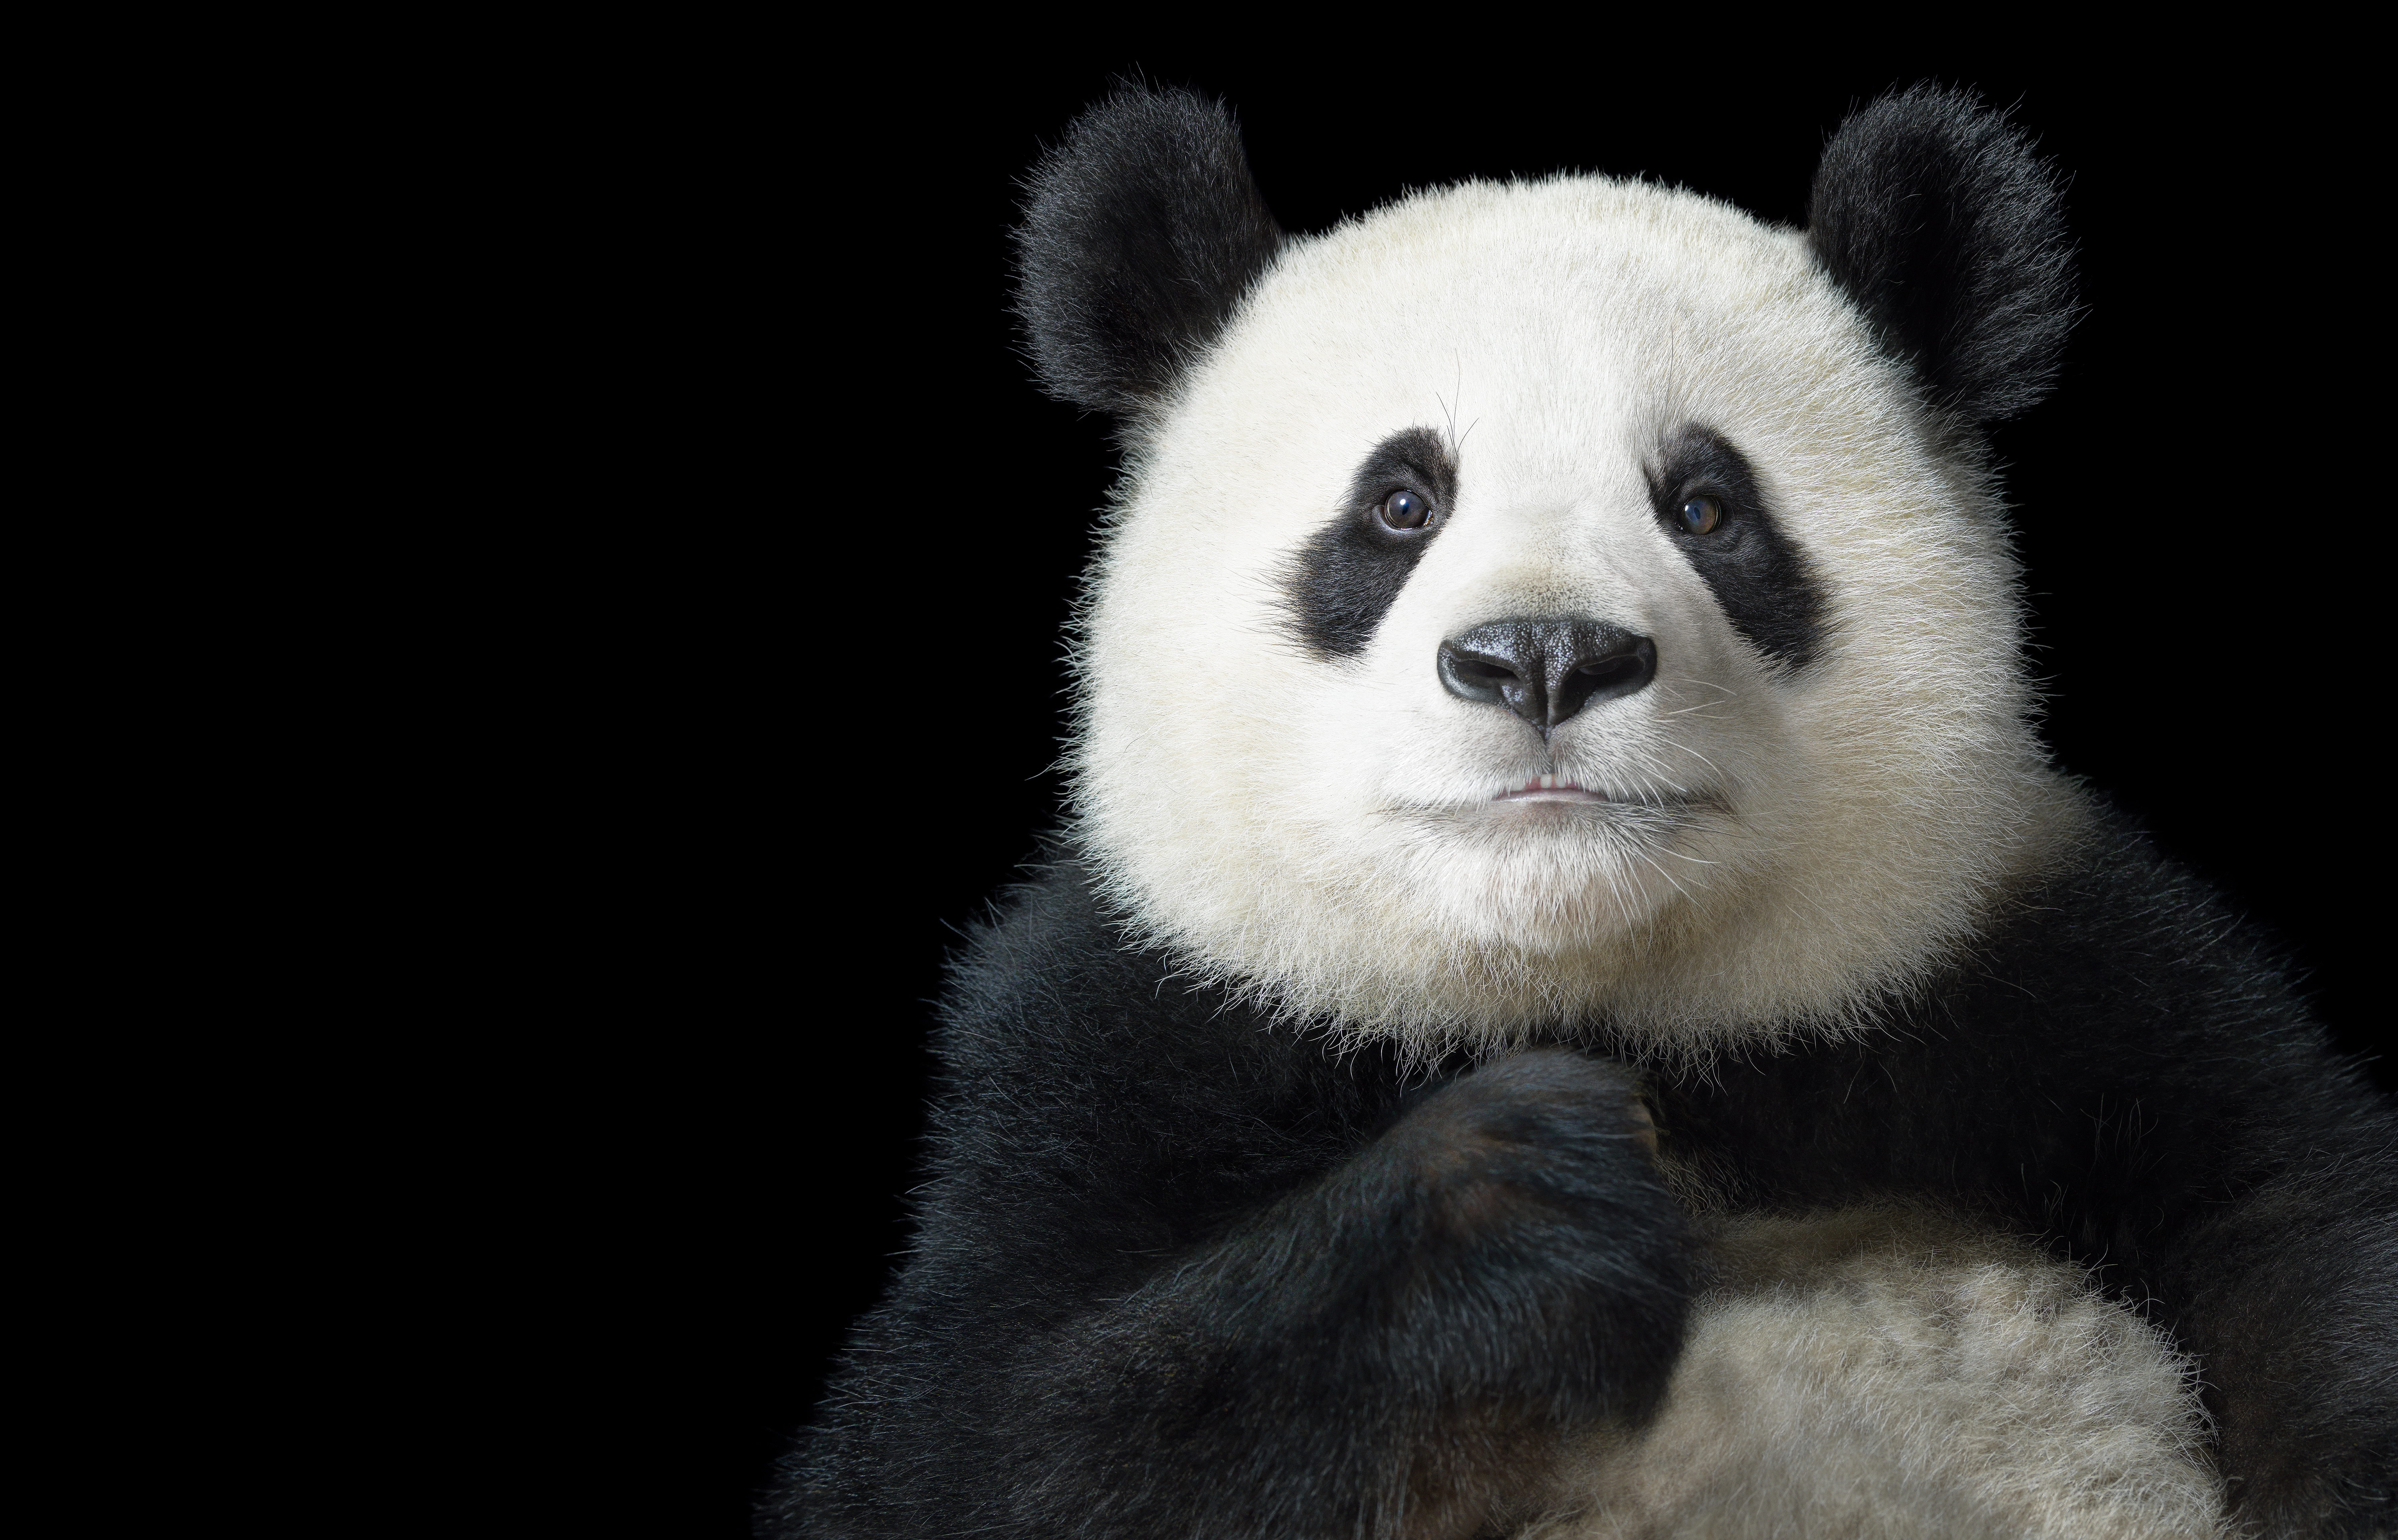 April Edition: The Giant Panda – Project: 